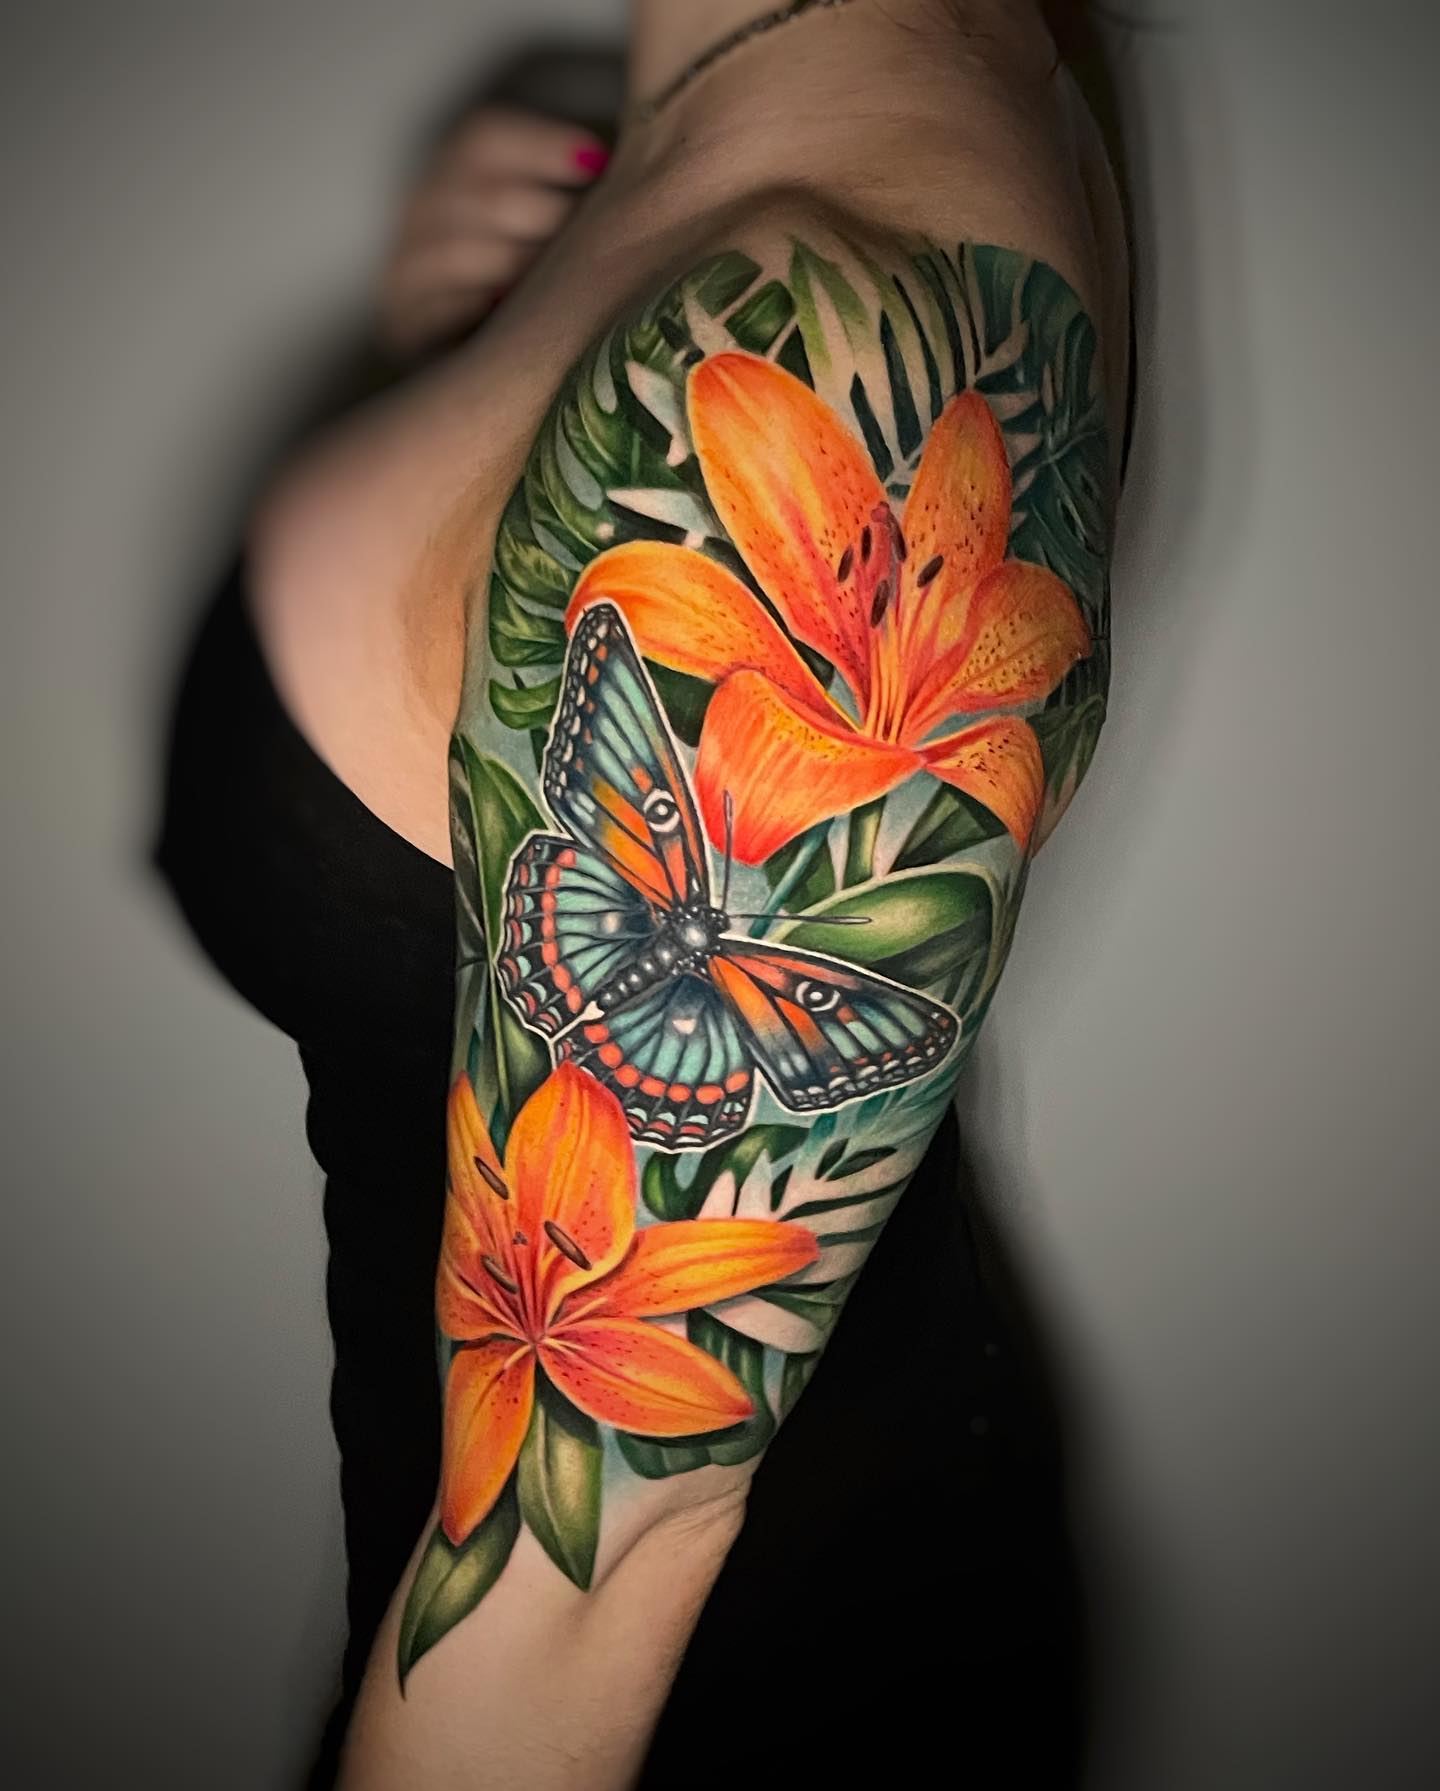 Want to cover up your upper arm with lilies? If your answer is yes, the colorful and vivid tattoo design is for you! The color palette includes green, orange and blue. Besides realistic orange lilies, a butterfly is used to make this tattoo greater.